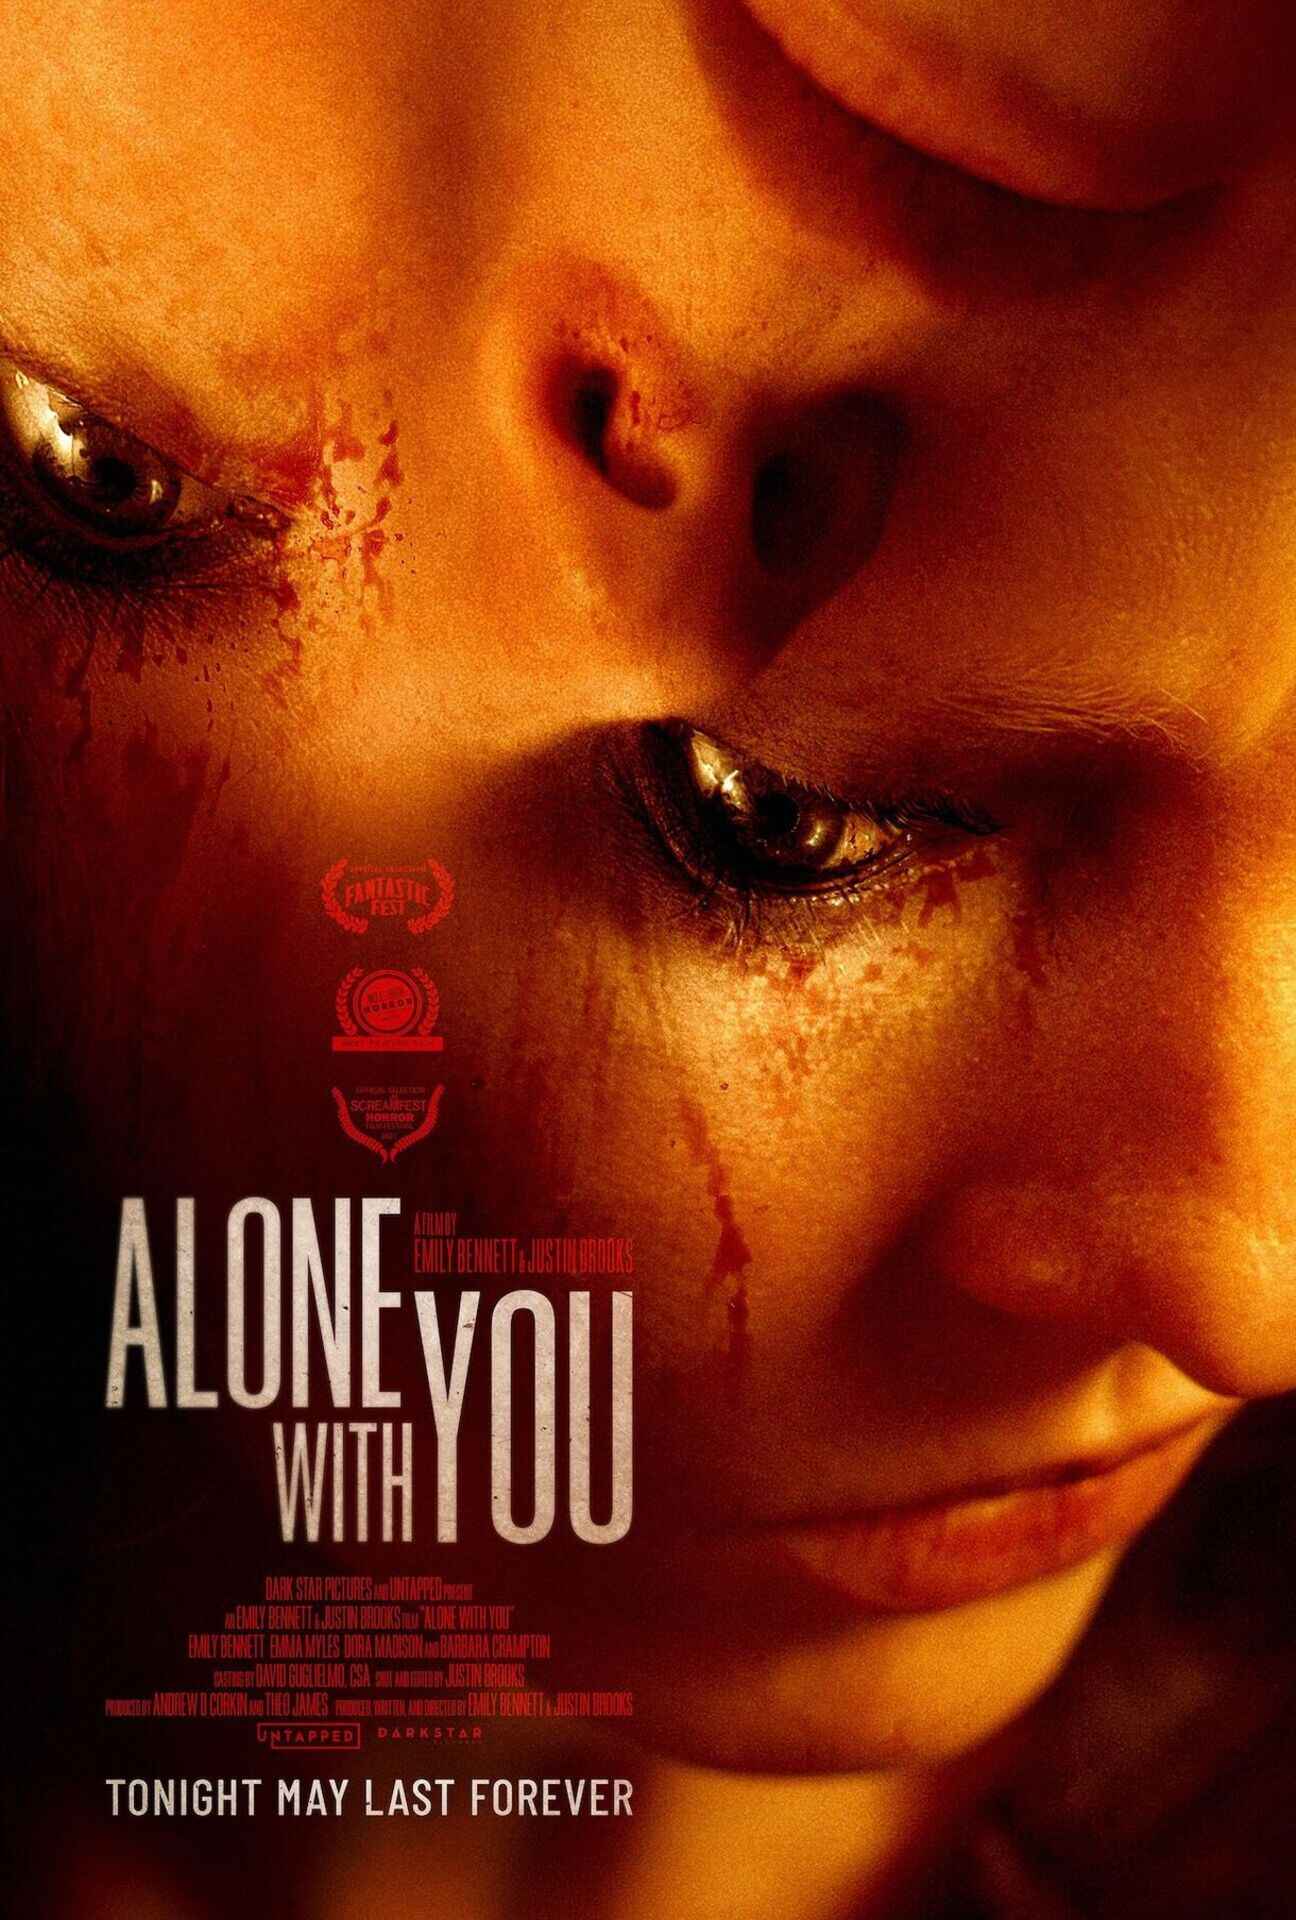 Theatrical poster for the horror film Alone With You, a Dark Star Pictures release.